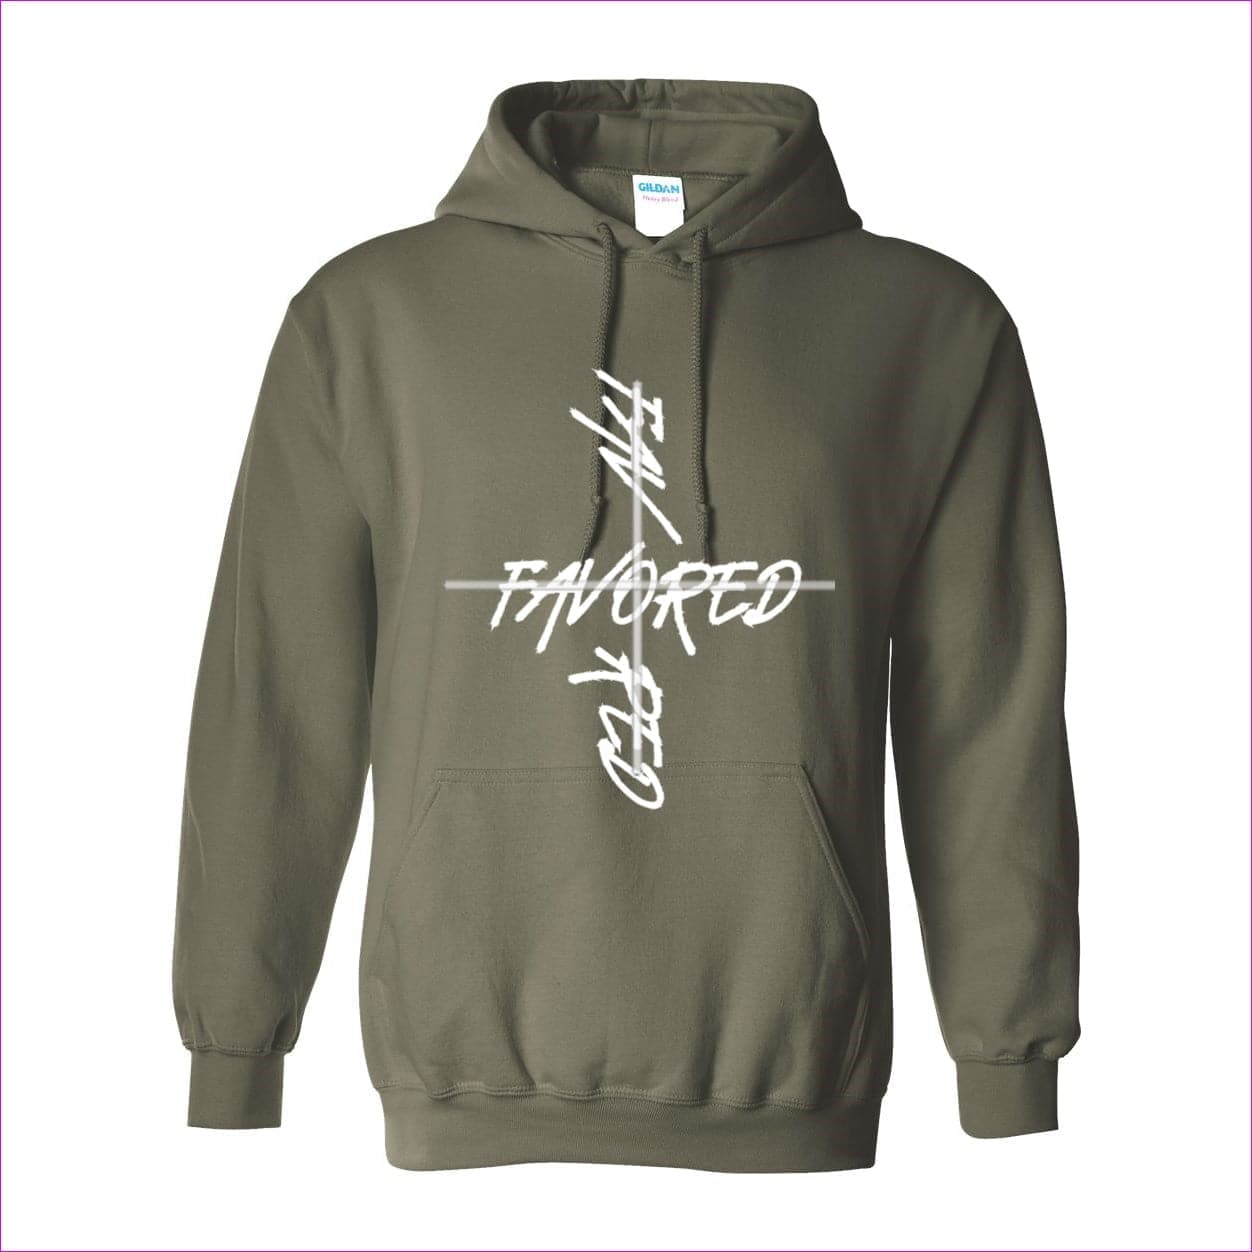 Military Green - Favored 2 Unisex Heavy Blend Hooded Sweatshirt - unisex hoodies at TFC&H Co.